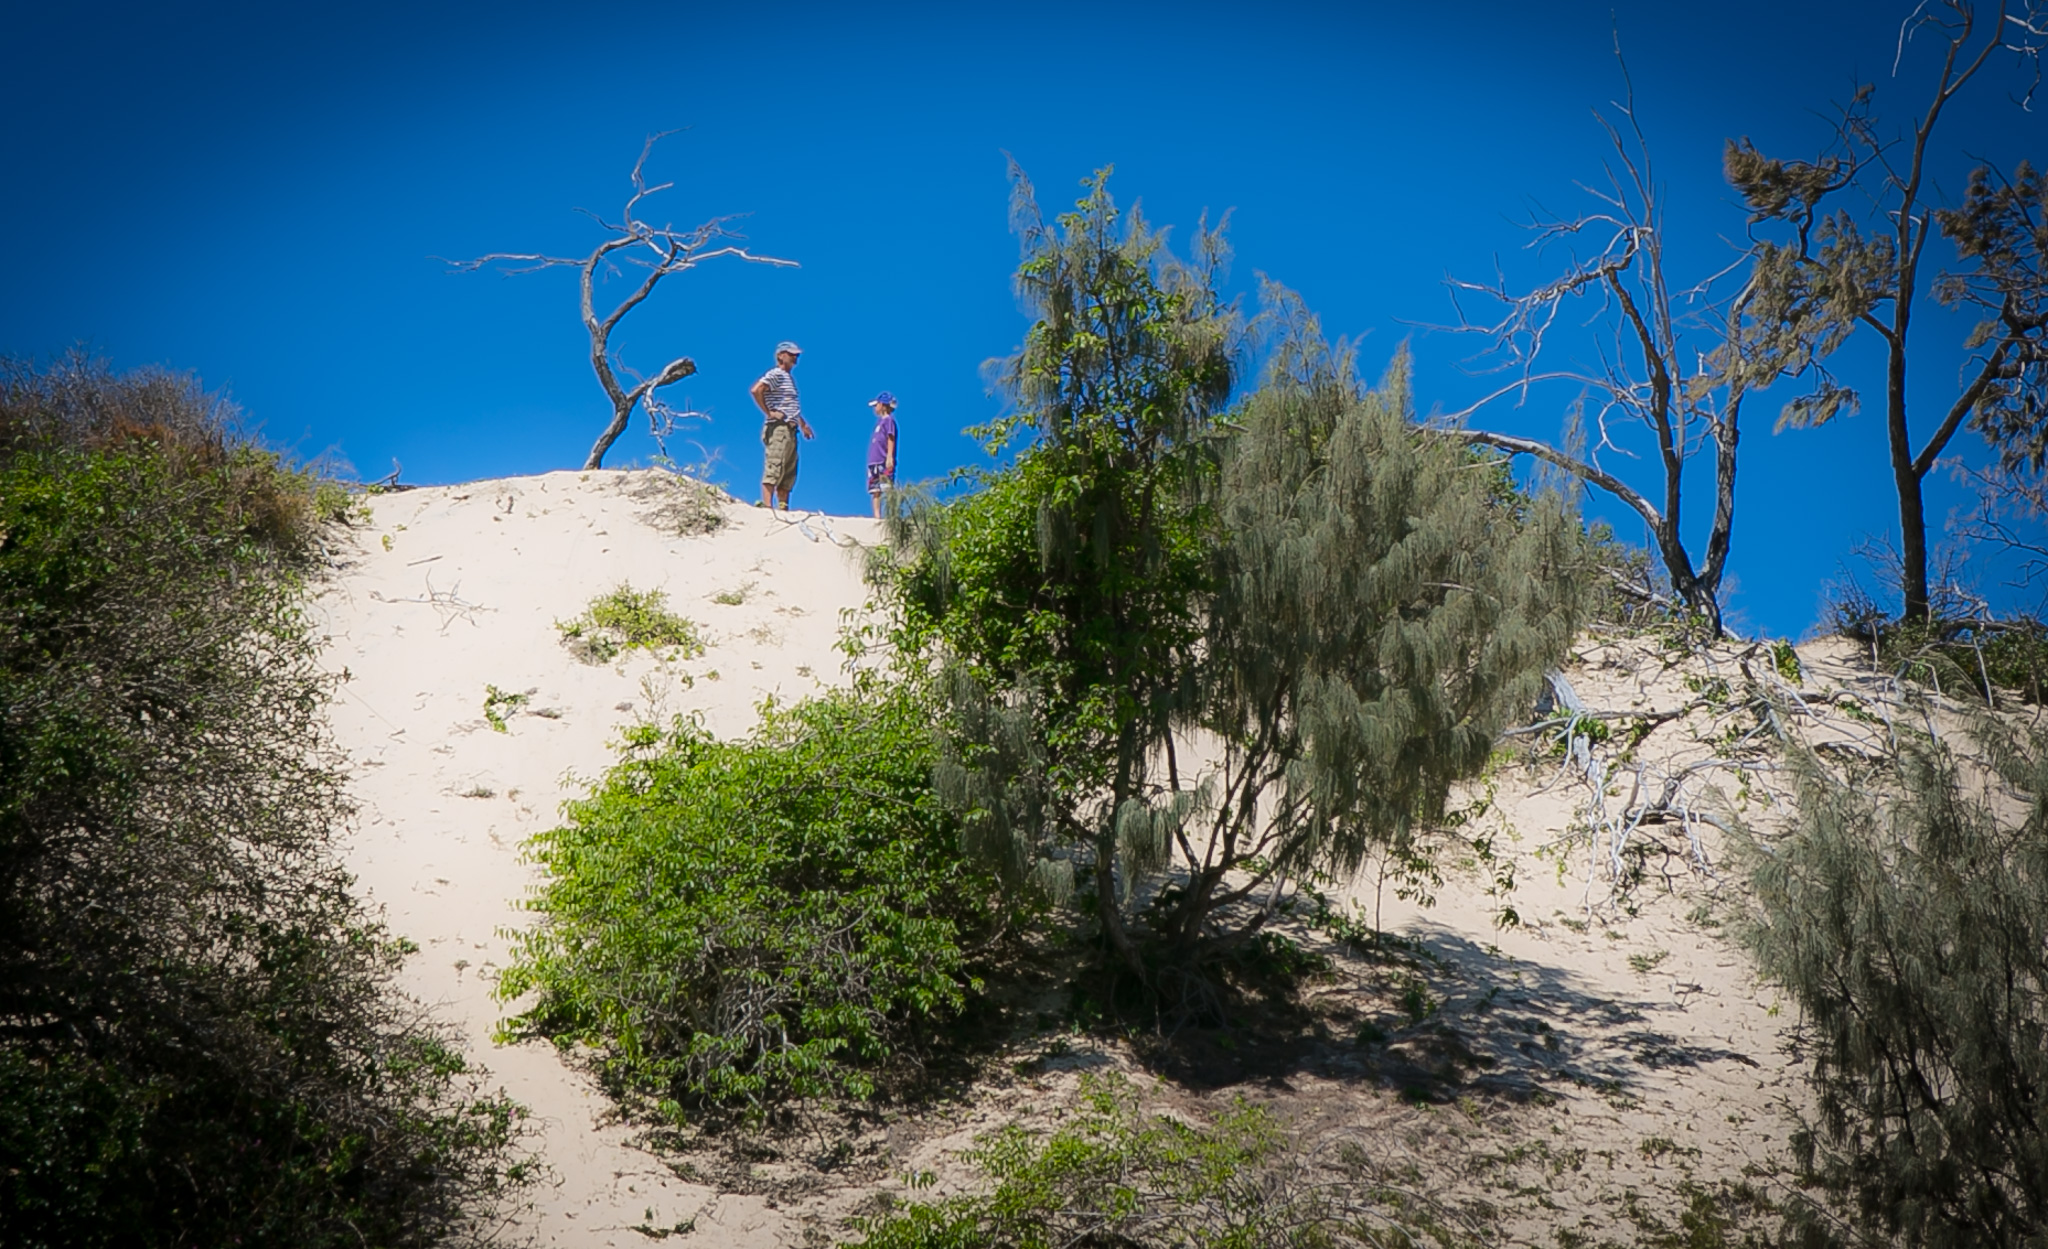 Top of the Dune